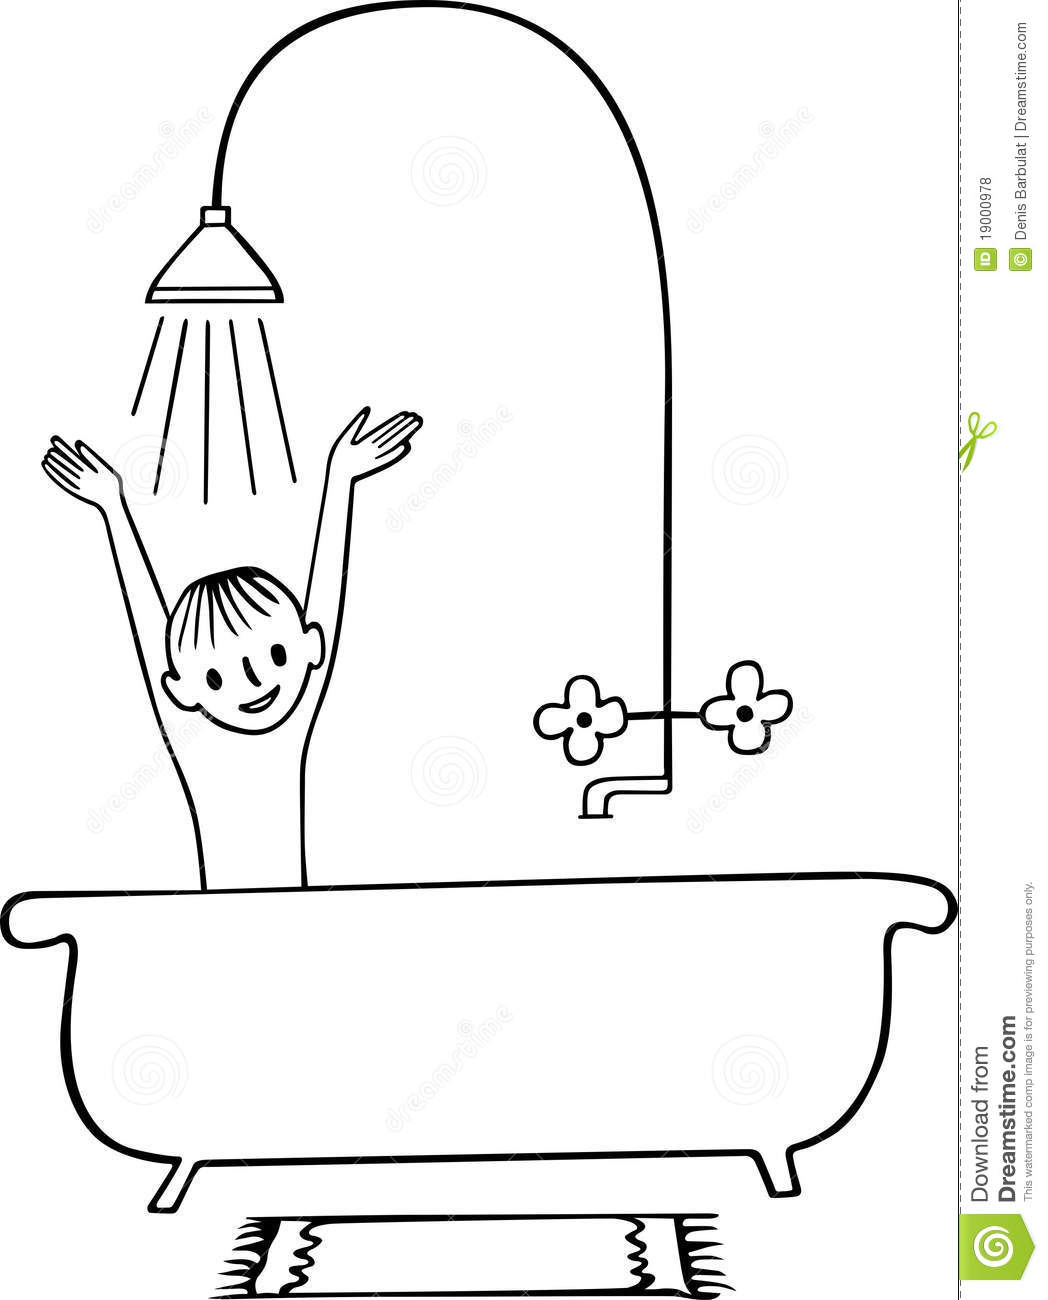 Taking A Shower Boy Royalty Free Stock Photos   Image  19000978